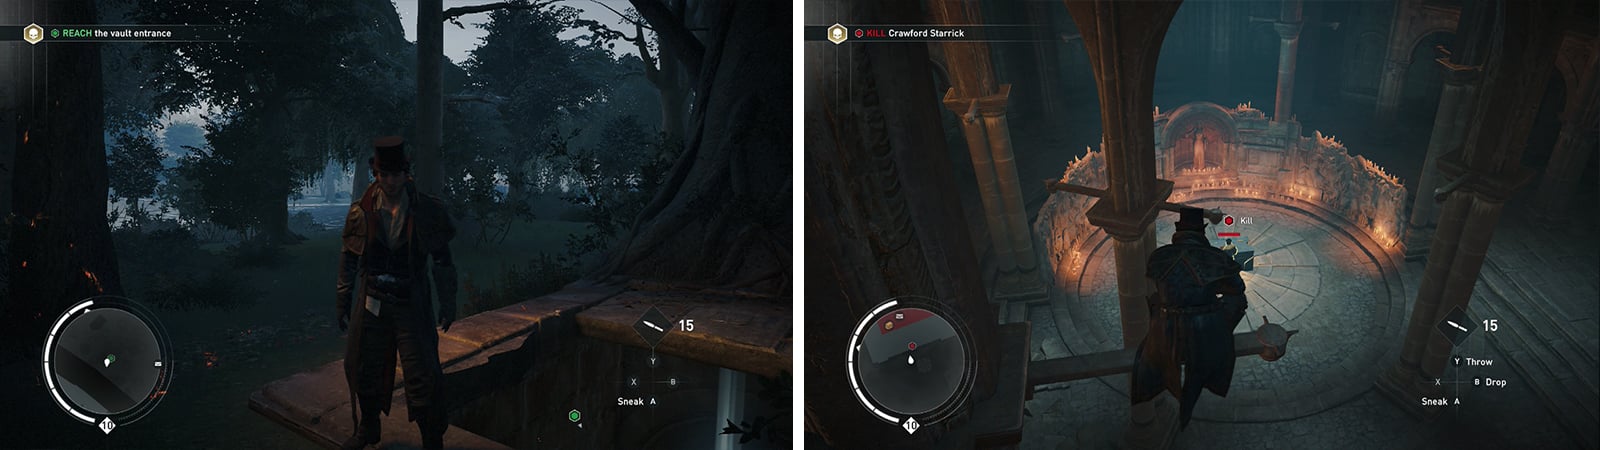 Cross the water to find a tunnel leading ot the vault (left). Inside sneak up to assassinate the target (right).